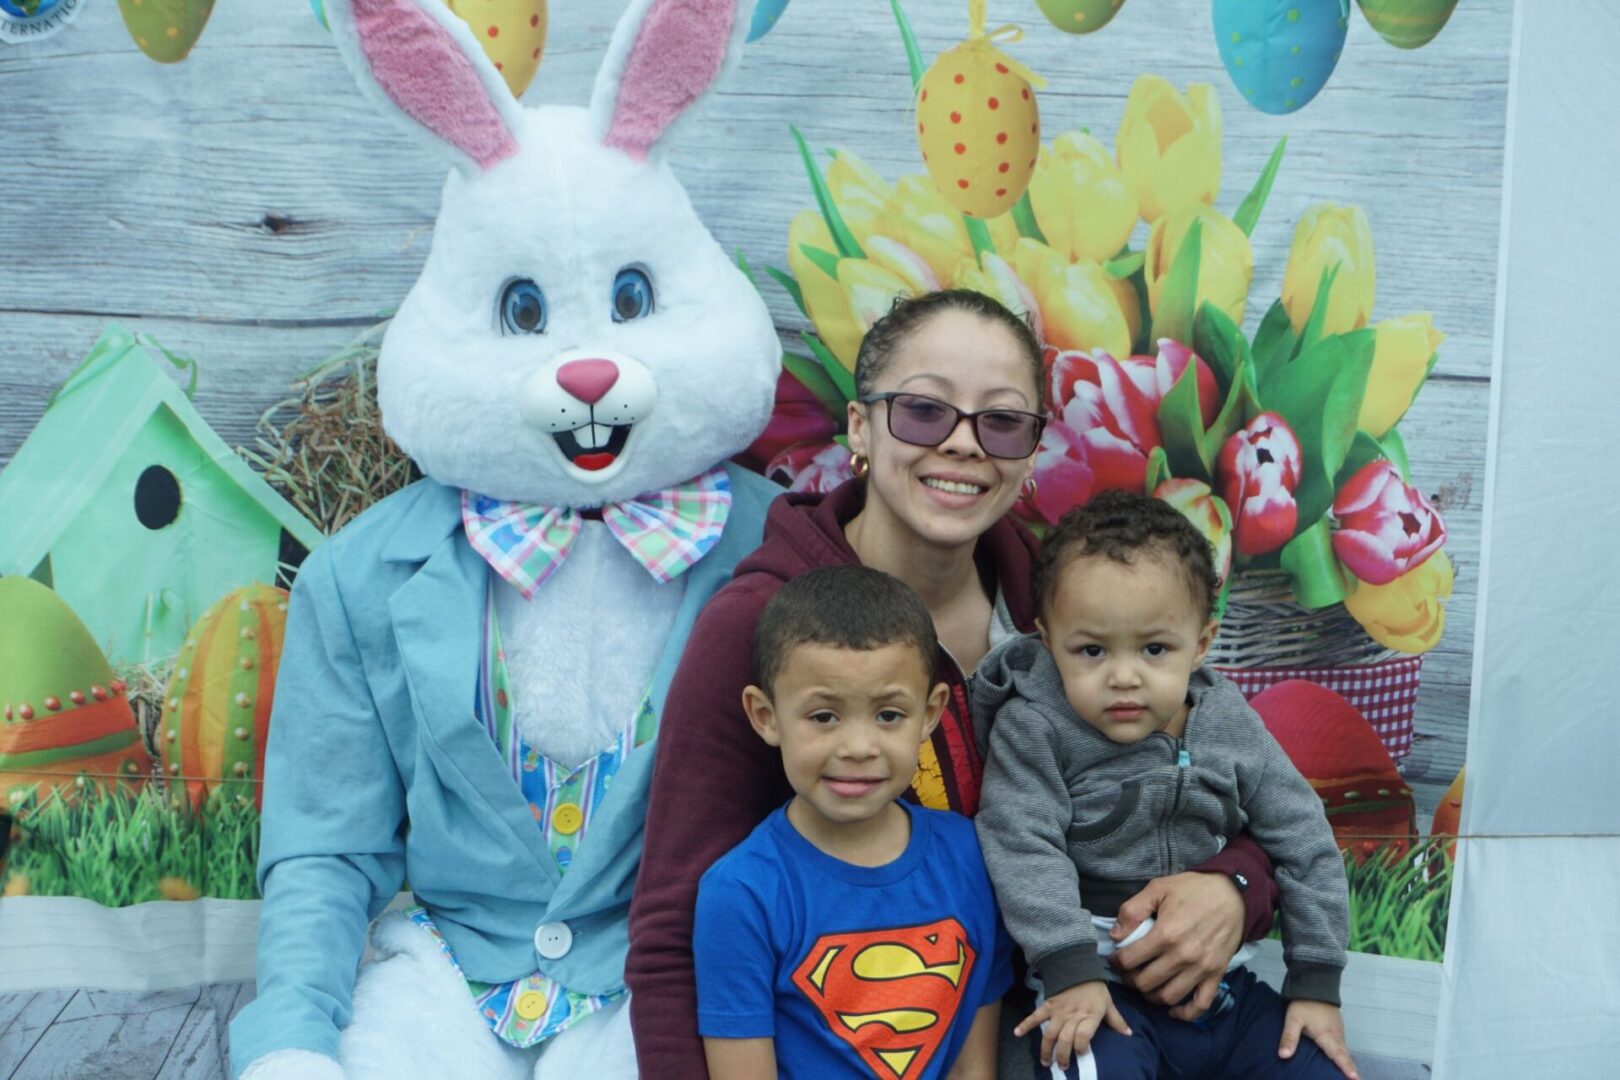 The bunny mascot and a mother with her two boys